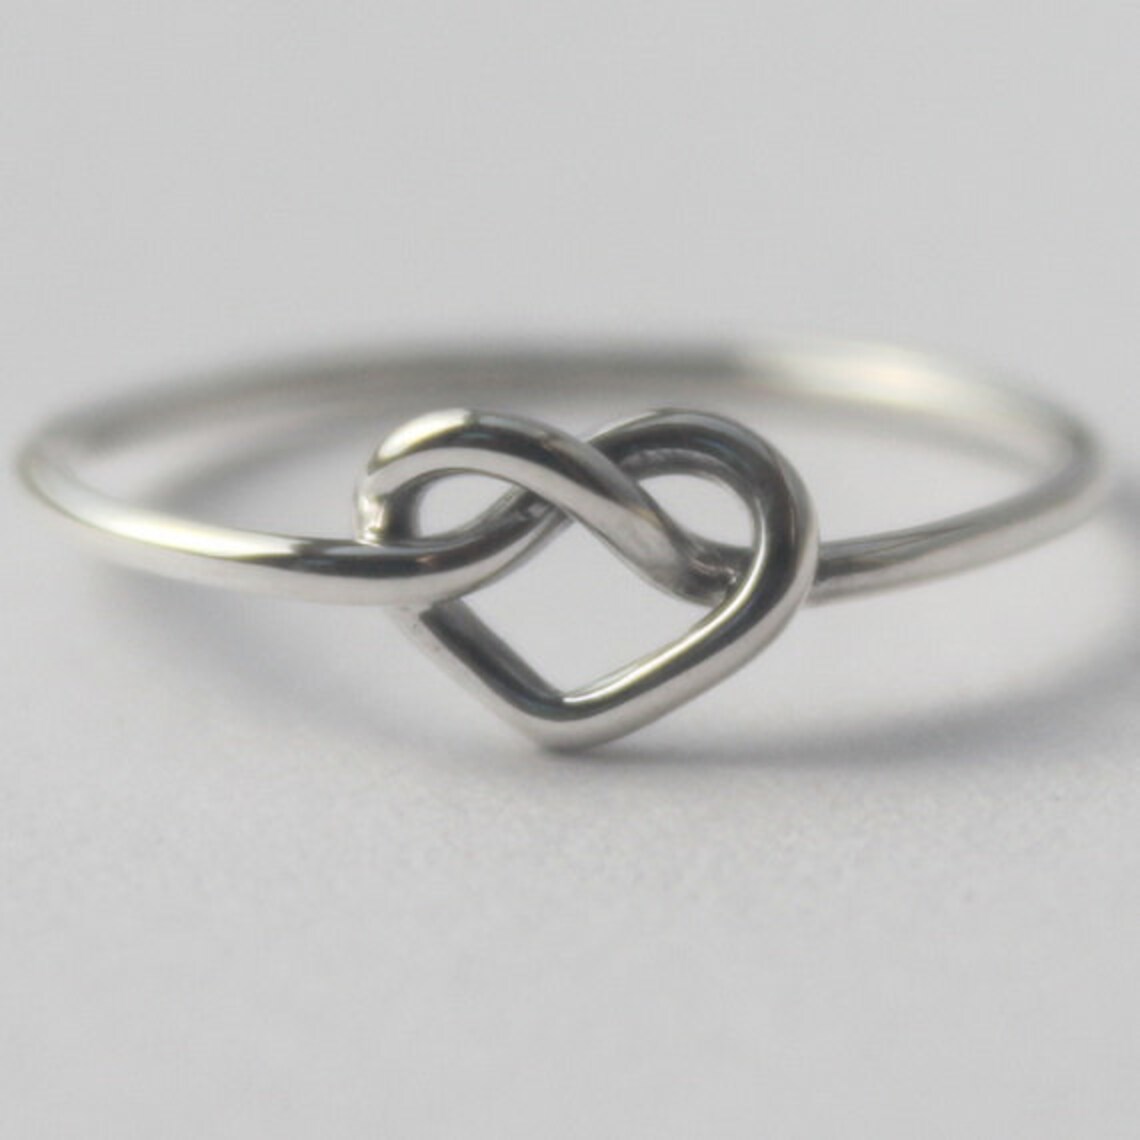 Sterling Silver Knot Heart Ring Infinity Love Symbol. | Etsy